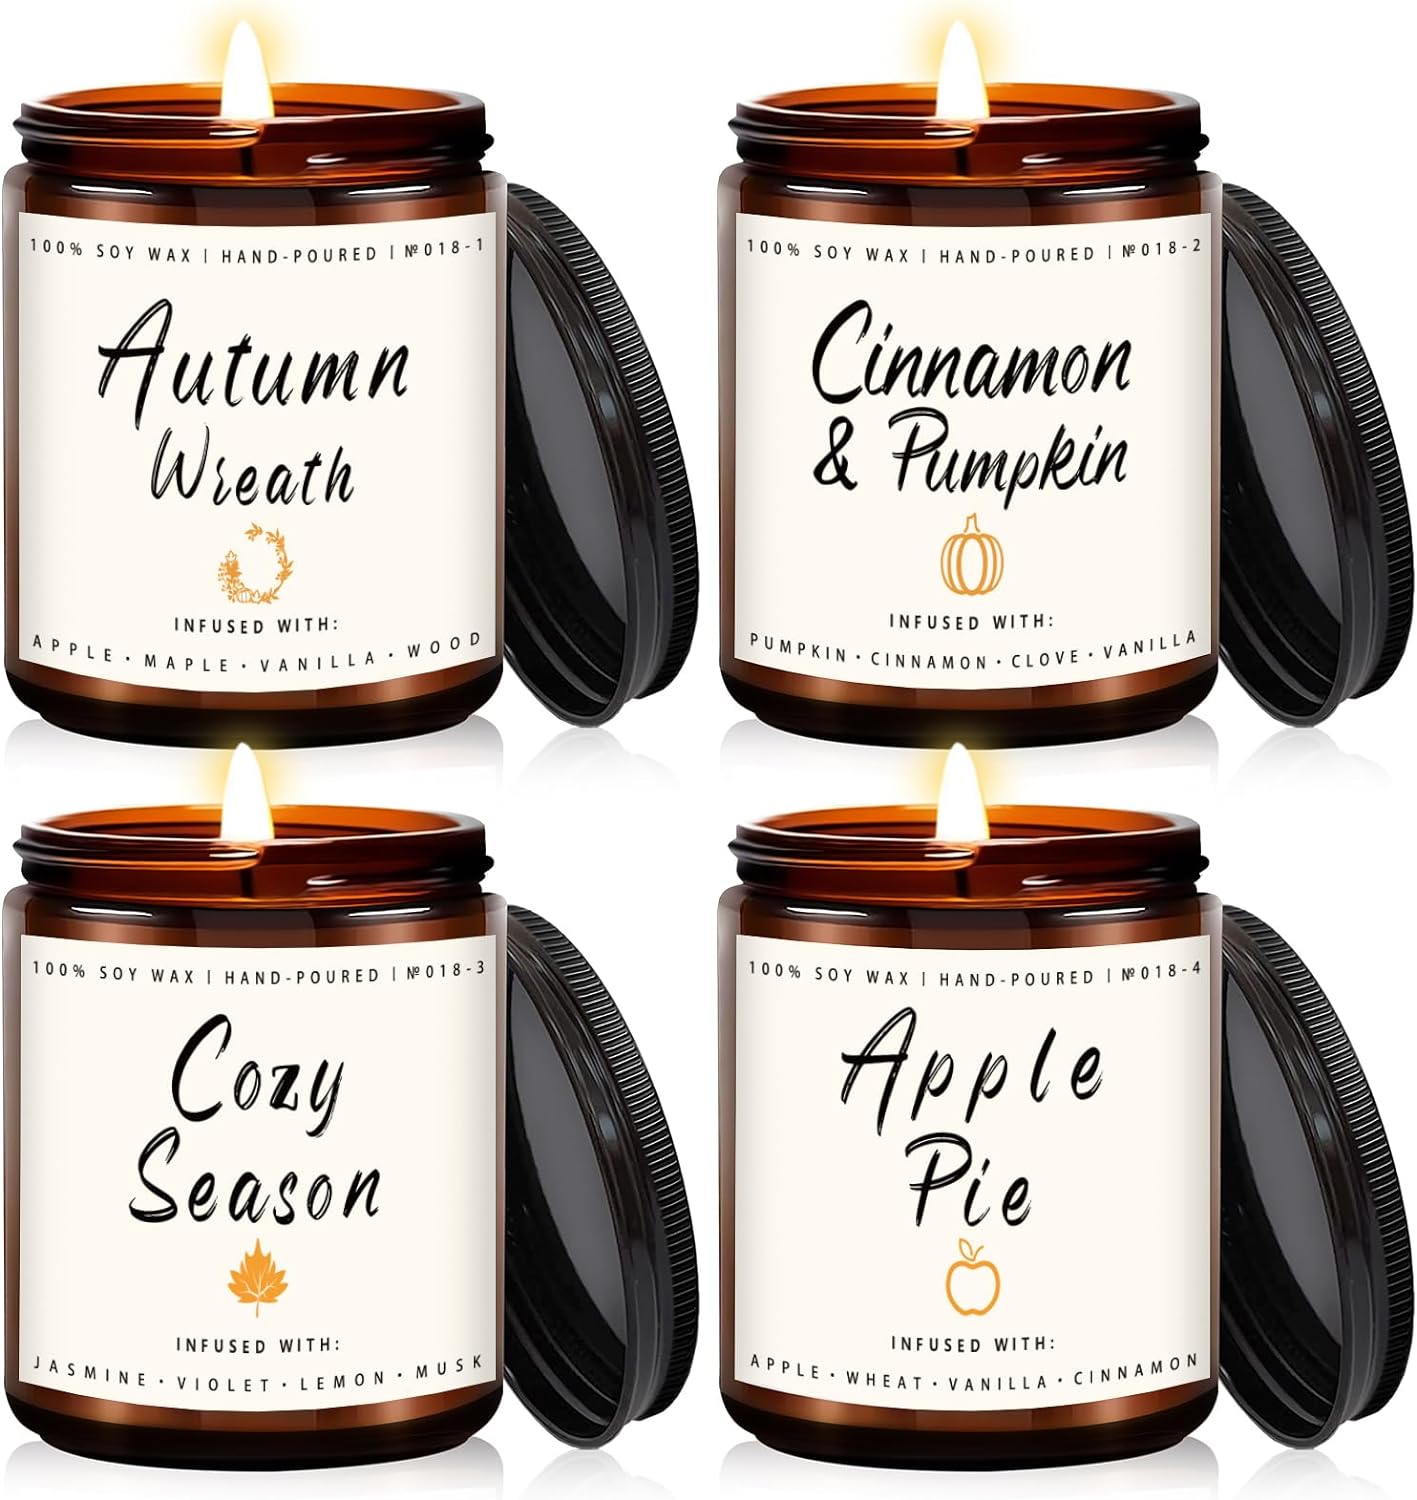 Fall Candle Set | Scented Candle Gift Set, Scented Candle of Autumn Wreath, Pumpkin Spice, Cozy Season, Apple Pie, Fall Scented Candles for Home - Fall Candle Gift Set for Men and Women